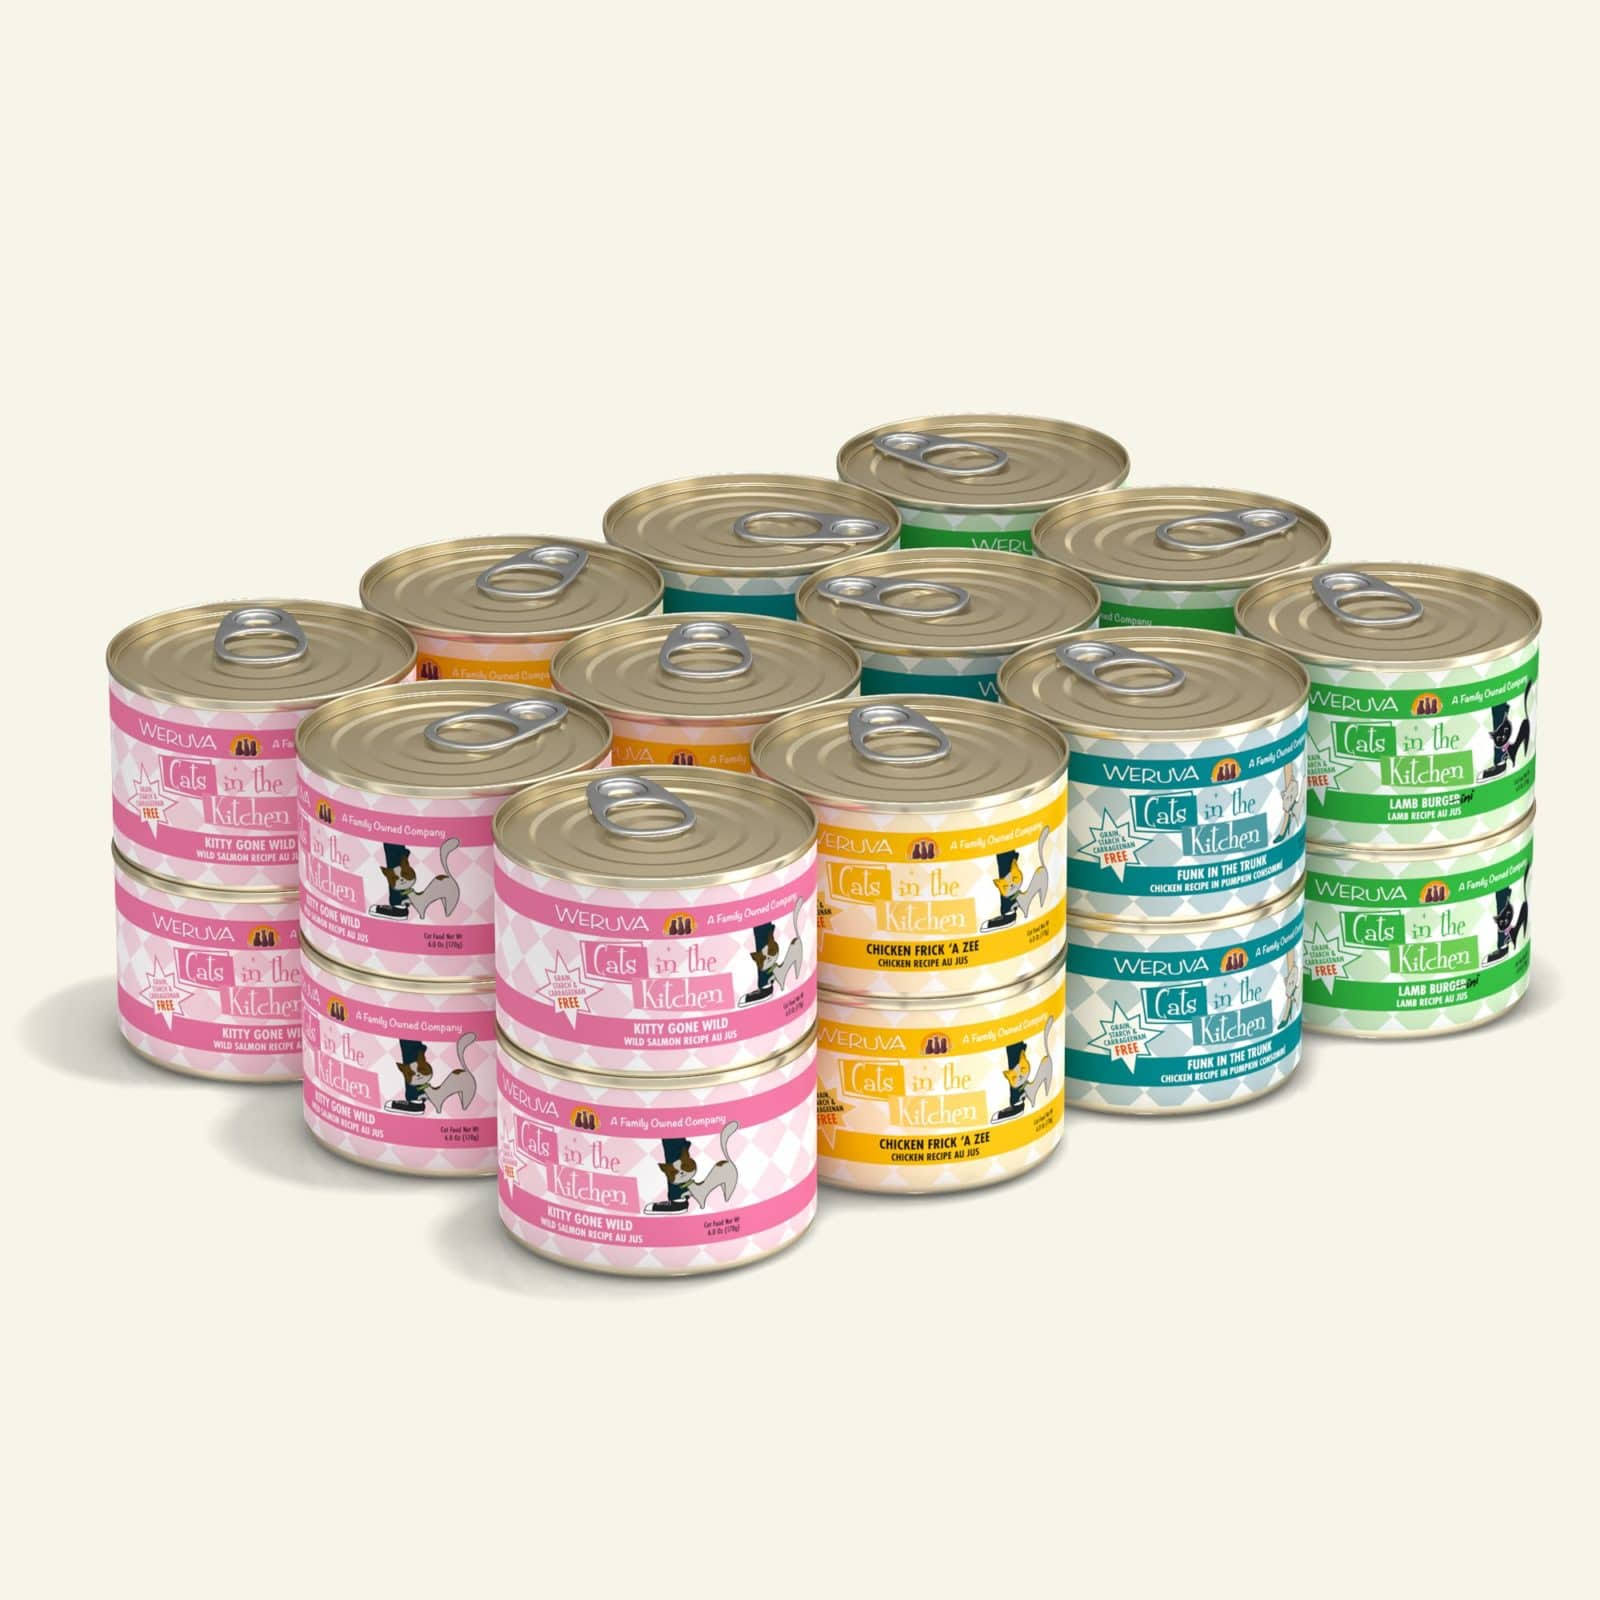 Cats in The Kitchen Grain Free Kitchen Cuties Variety Pack Canned Cat Food, 6 oz, Case of 24